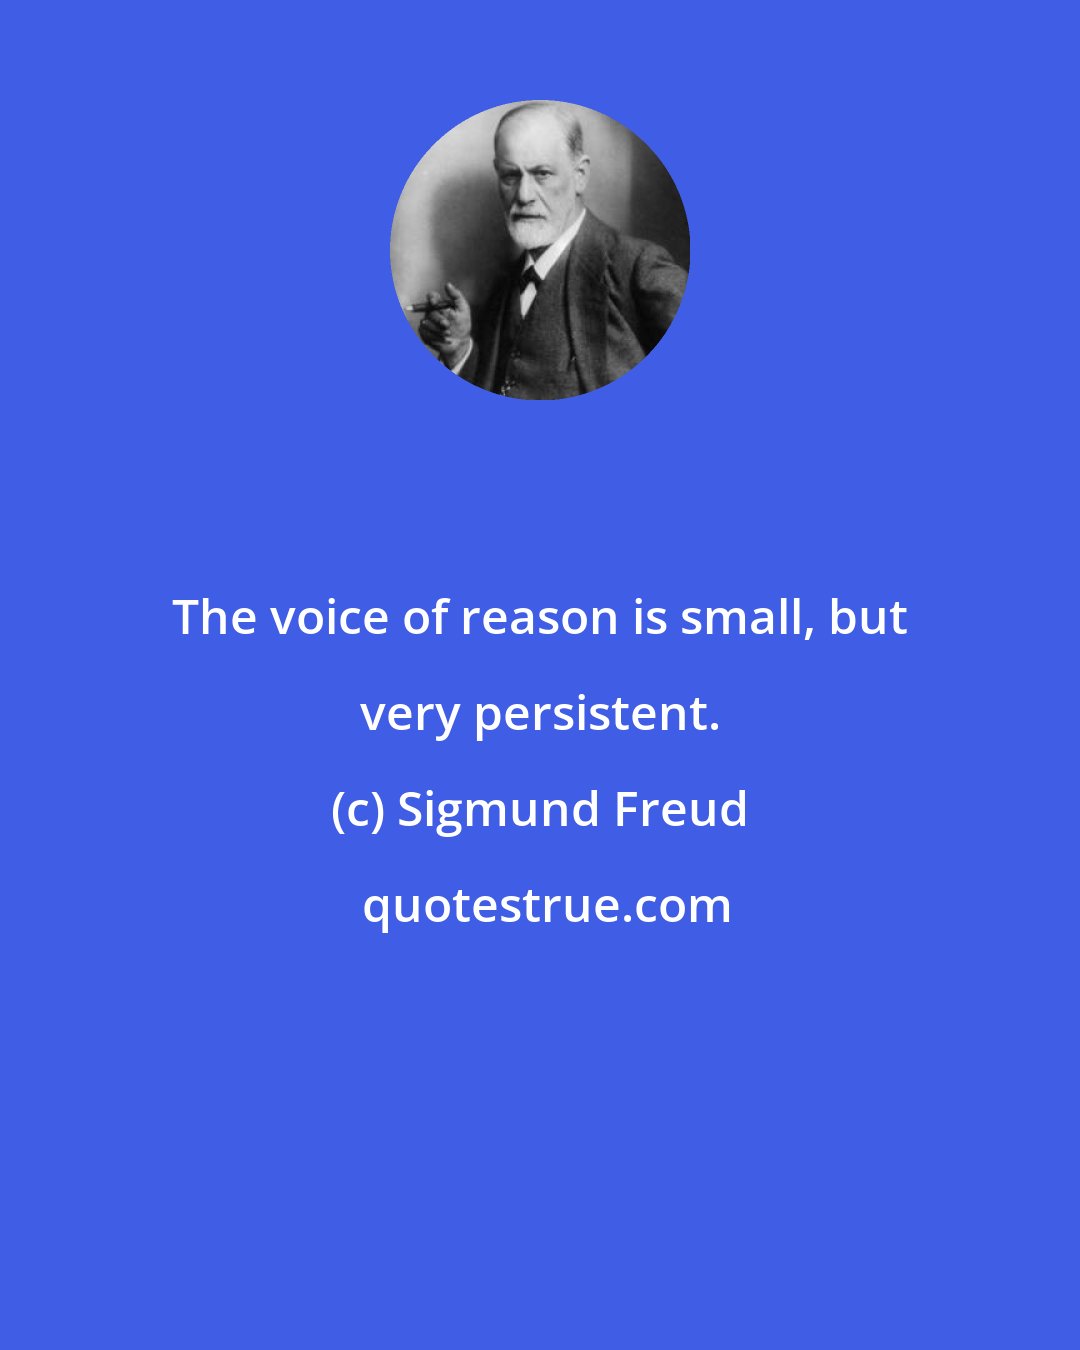 Sigmund Freud: The voice of reason is small, but very persistent.